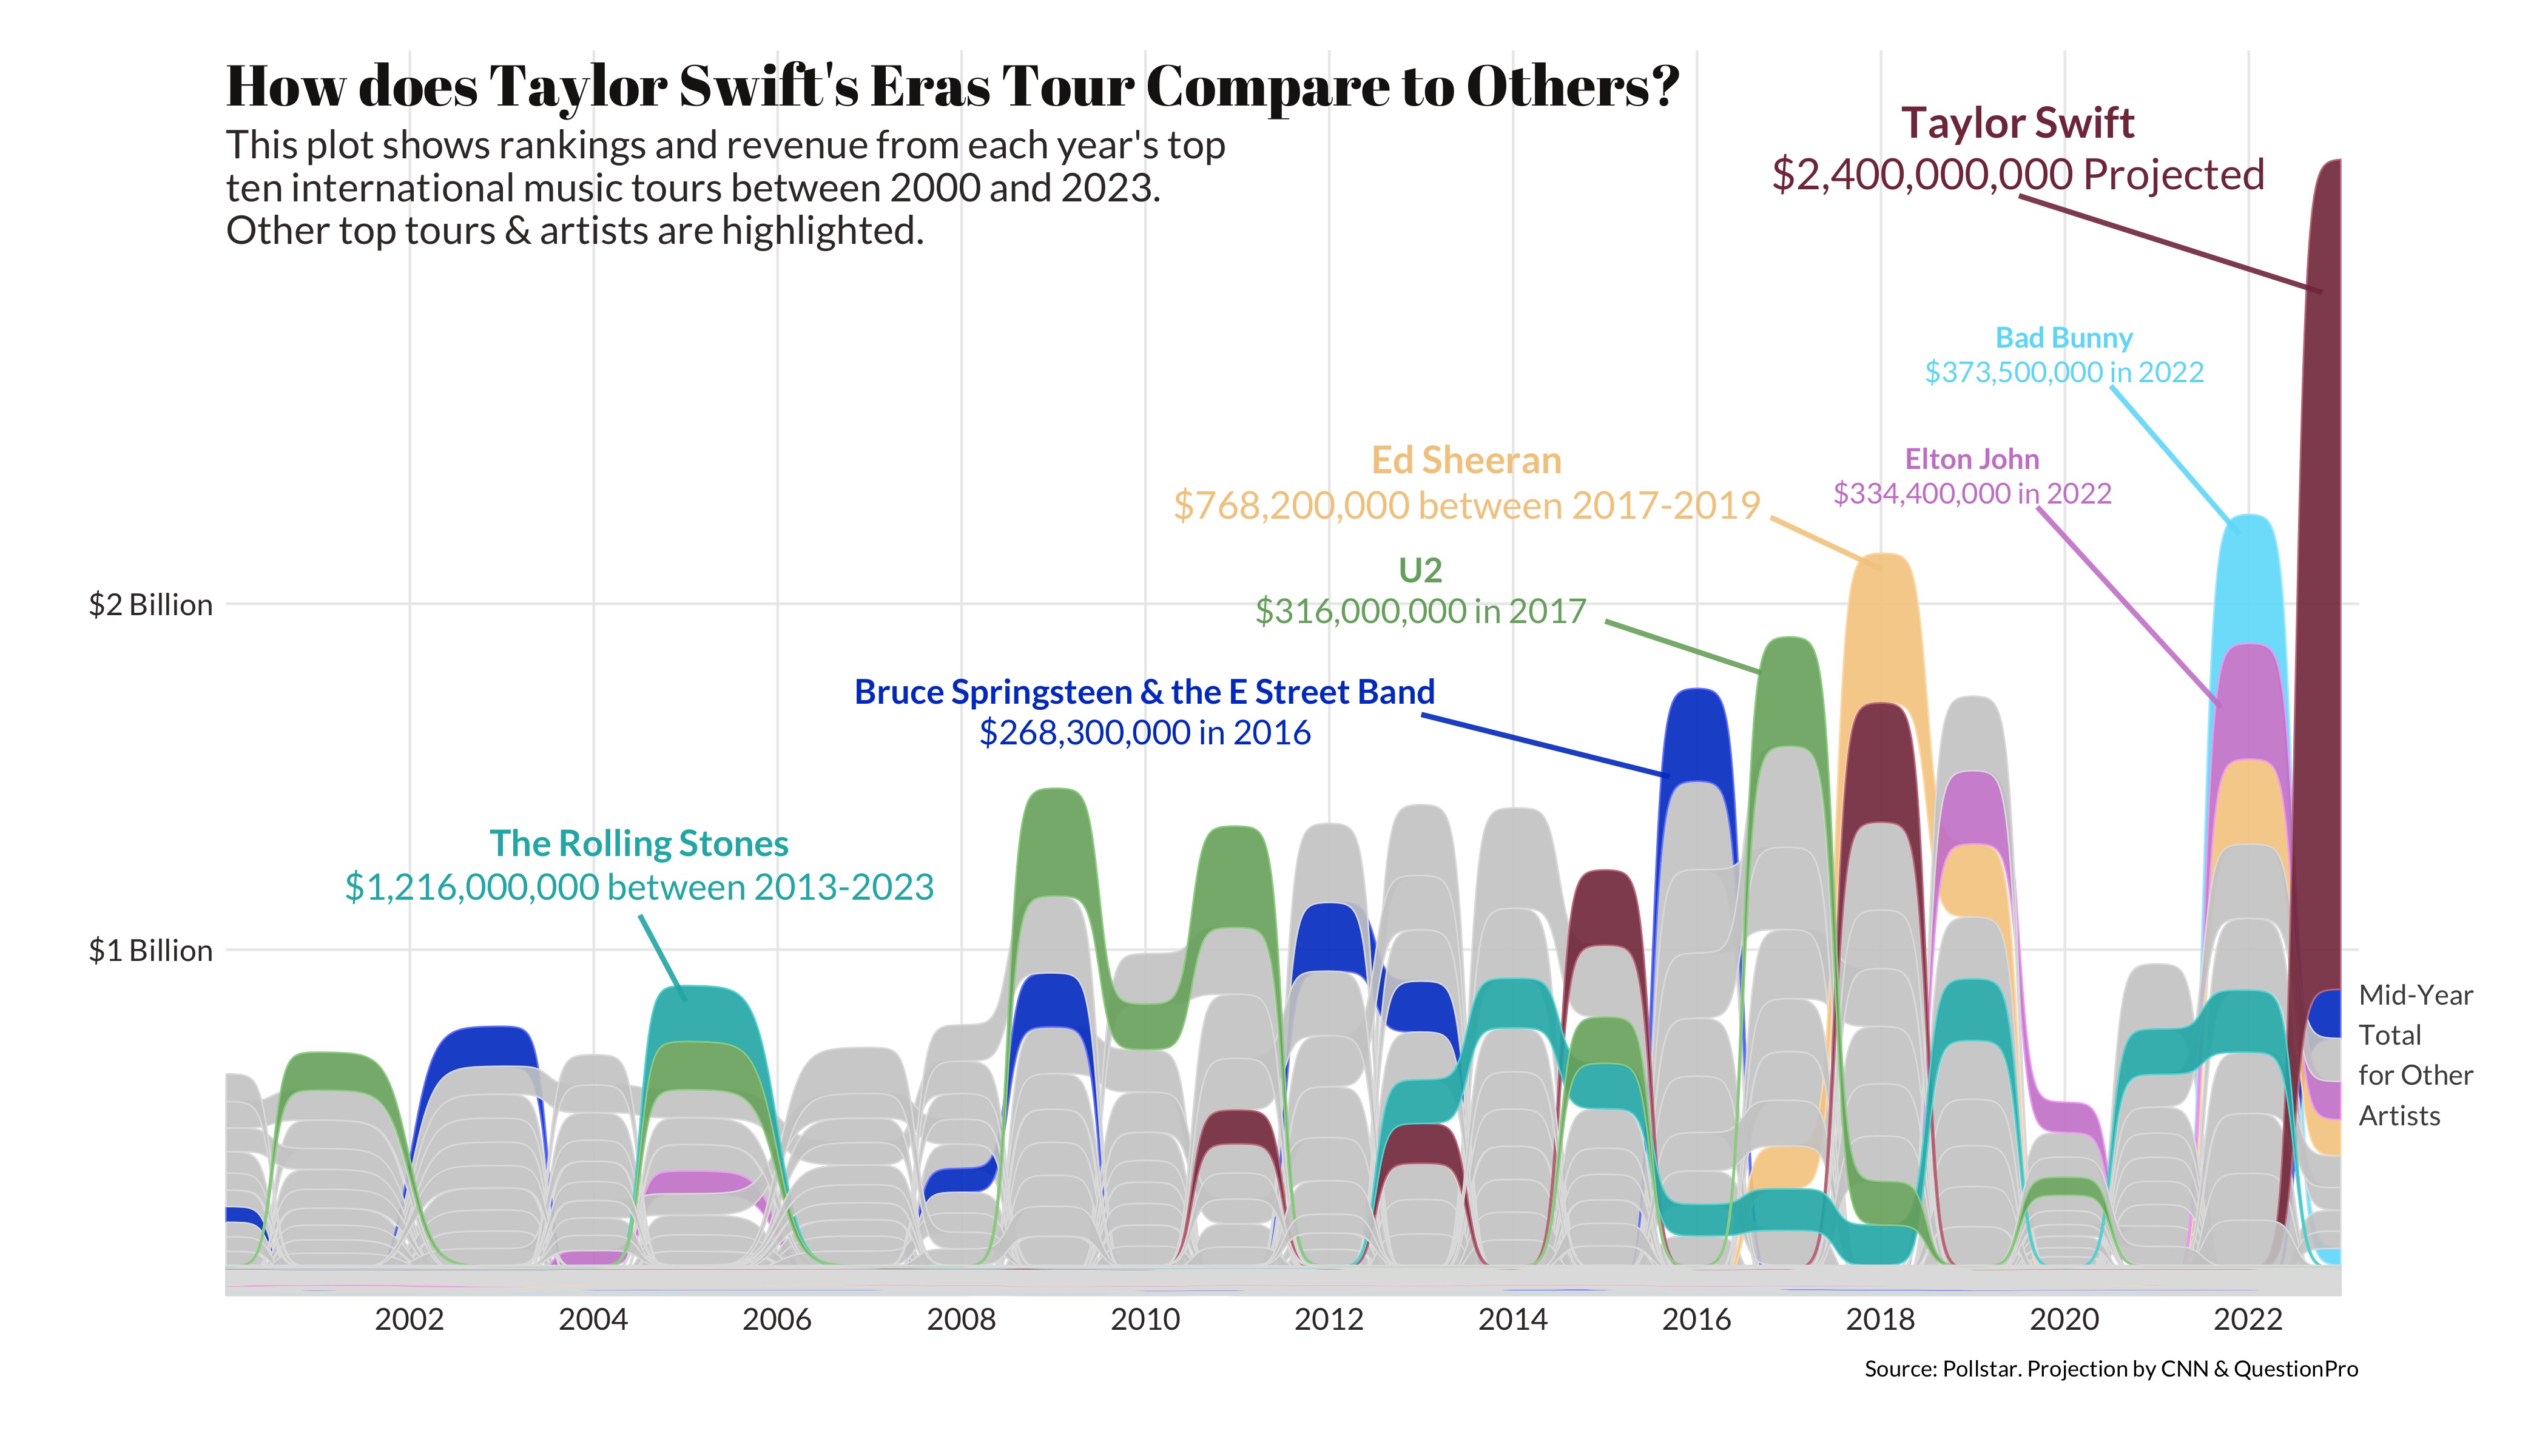 A data visualization titled How does Taylor Swift's Eras Tour Compare to Others? It displays a comparison of revenue from the top ten international music tours between 2000 and 2023. The background of the graph is white with gray grid lines indicating revenue levels up to $2 billion. The plot uses a streamgraph format, where the width of each stream represents the revenue in a given year for different artists' tours. Highlighted artists and their earnings include The Rolling Stones with $1.216 billion from 2013-2023, Bruce Springsteen & The E Street Band with $268.3 million in 2016, U2 with $316 million in 2017, Ed Sheeran with $768.2 million between 2017-2019, Elton John with $334.4 million in 2022, and Bad Bunny with $373.5 million in 2022. Taylor Swift's stream is the tallest, colored in pink, on the far right, with a projected revenue of $2.2 billion. The streams for other artists are in various colors such as blue, green, and purple, and they weave across the graph over time. The source is credited to Pollstar with projections by CNN & QuestionPro.